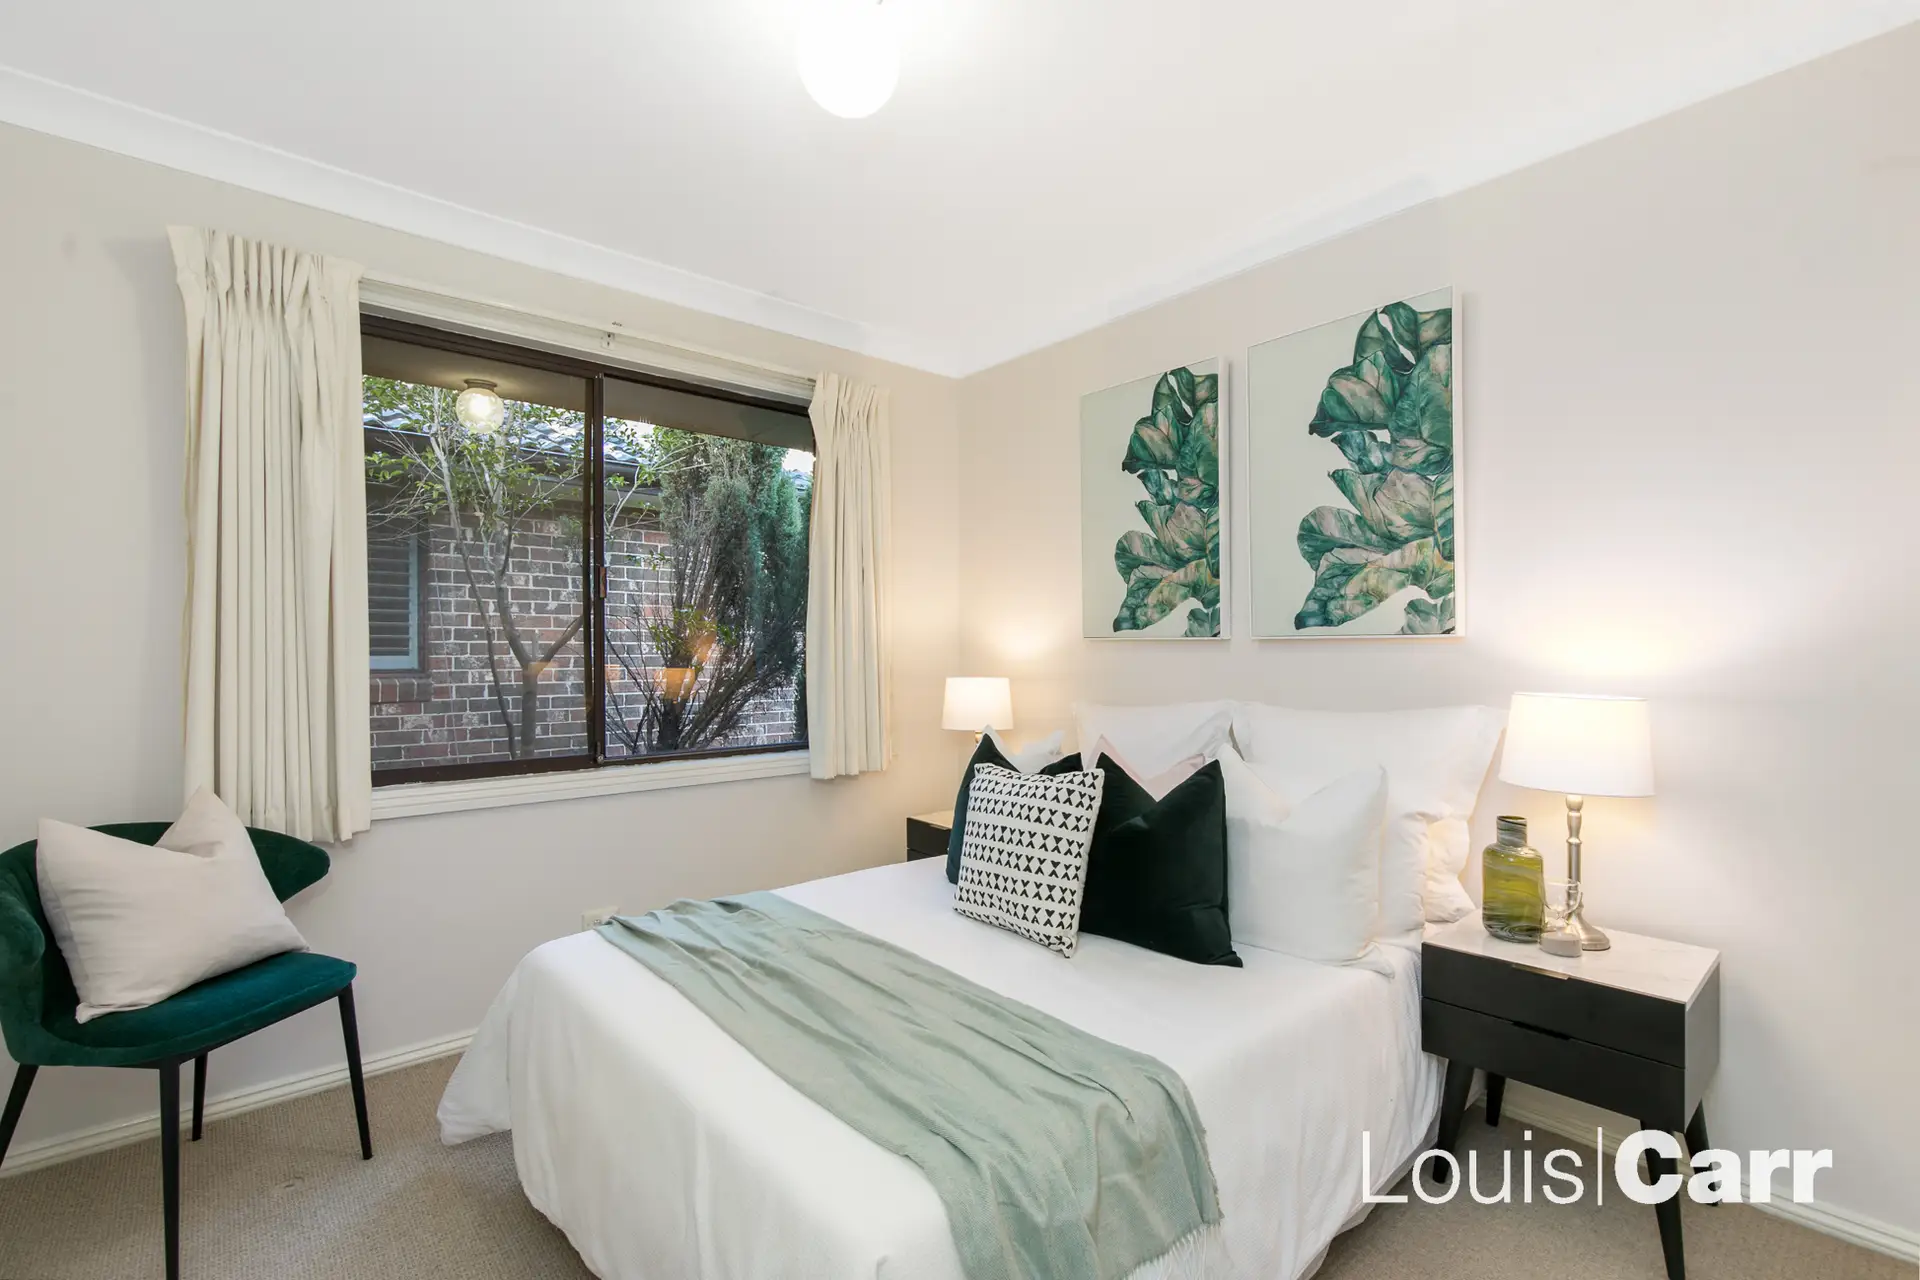 Photo #10: 29 Gumnut Road, Cherrybrook - Sold by Louis Carr Real Estate